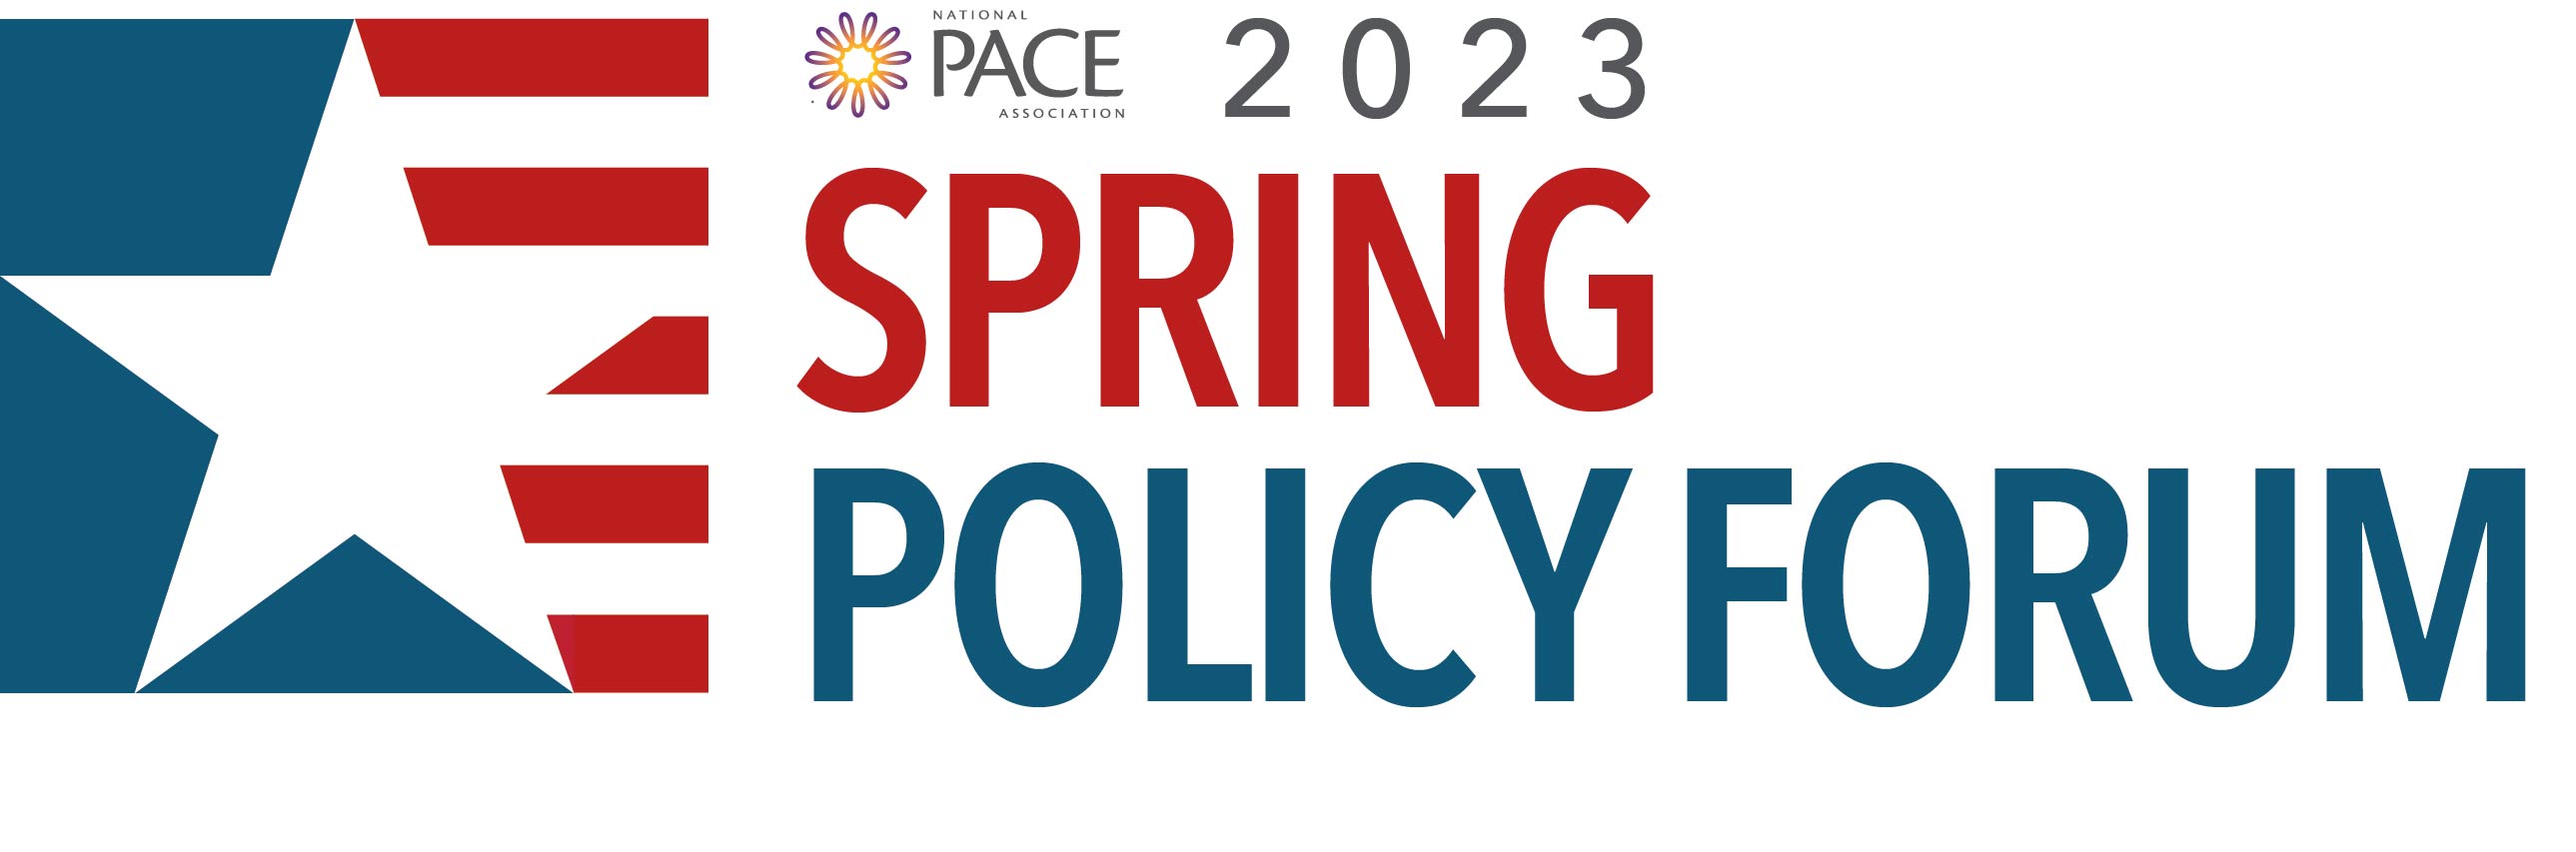 2023 Spring Policy Forum